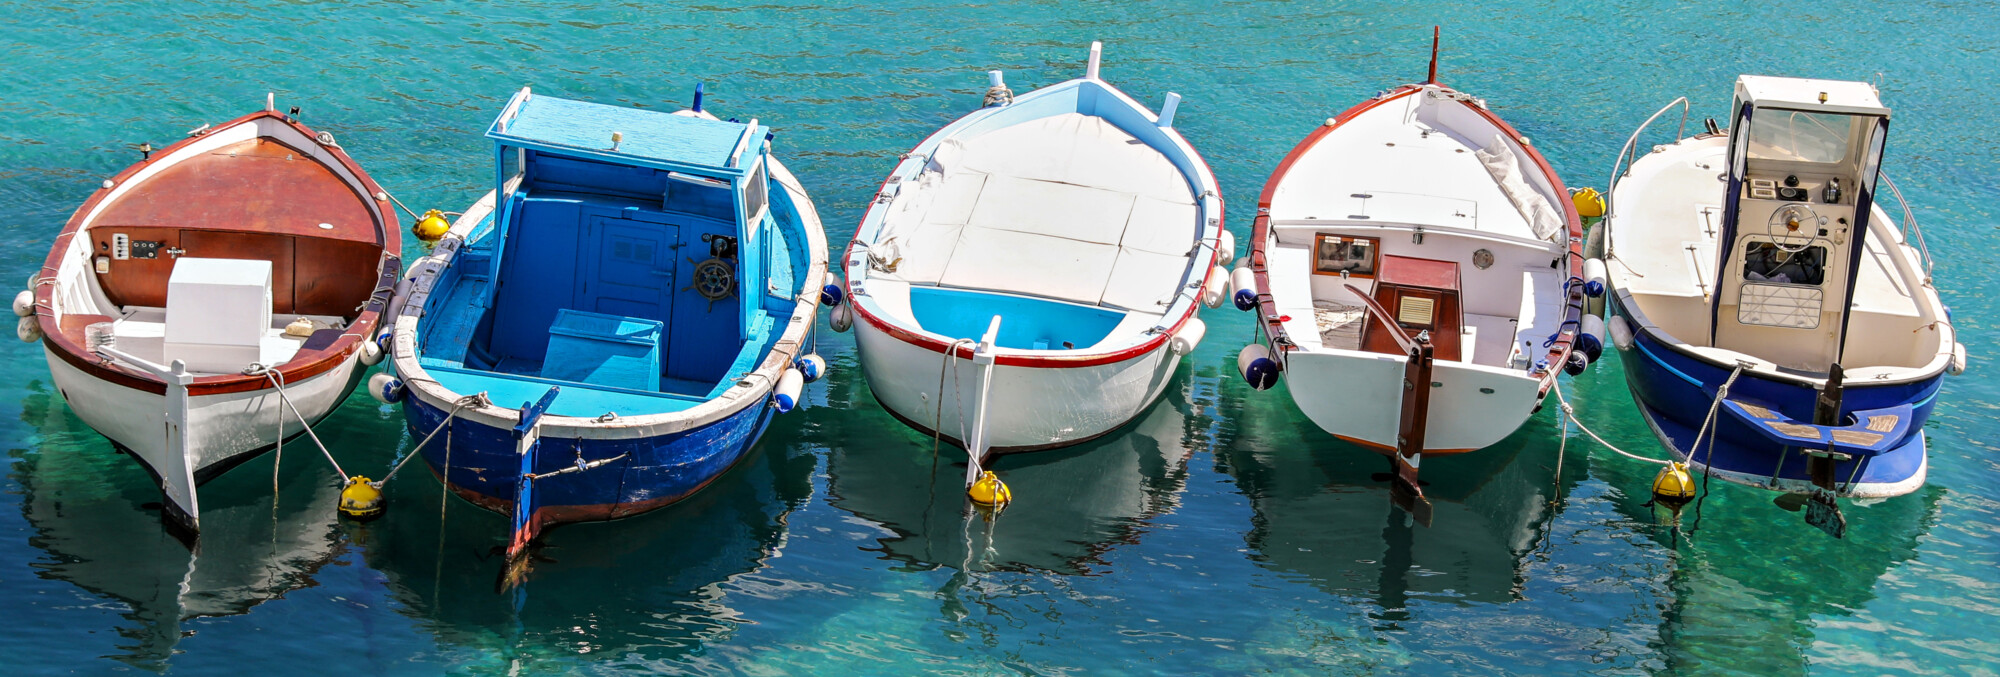 Five small fishing boats tied together in Puglia Italy.